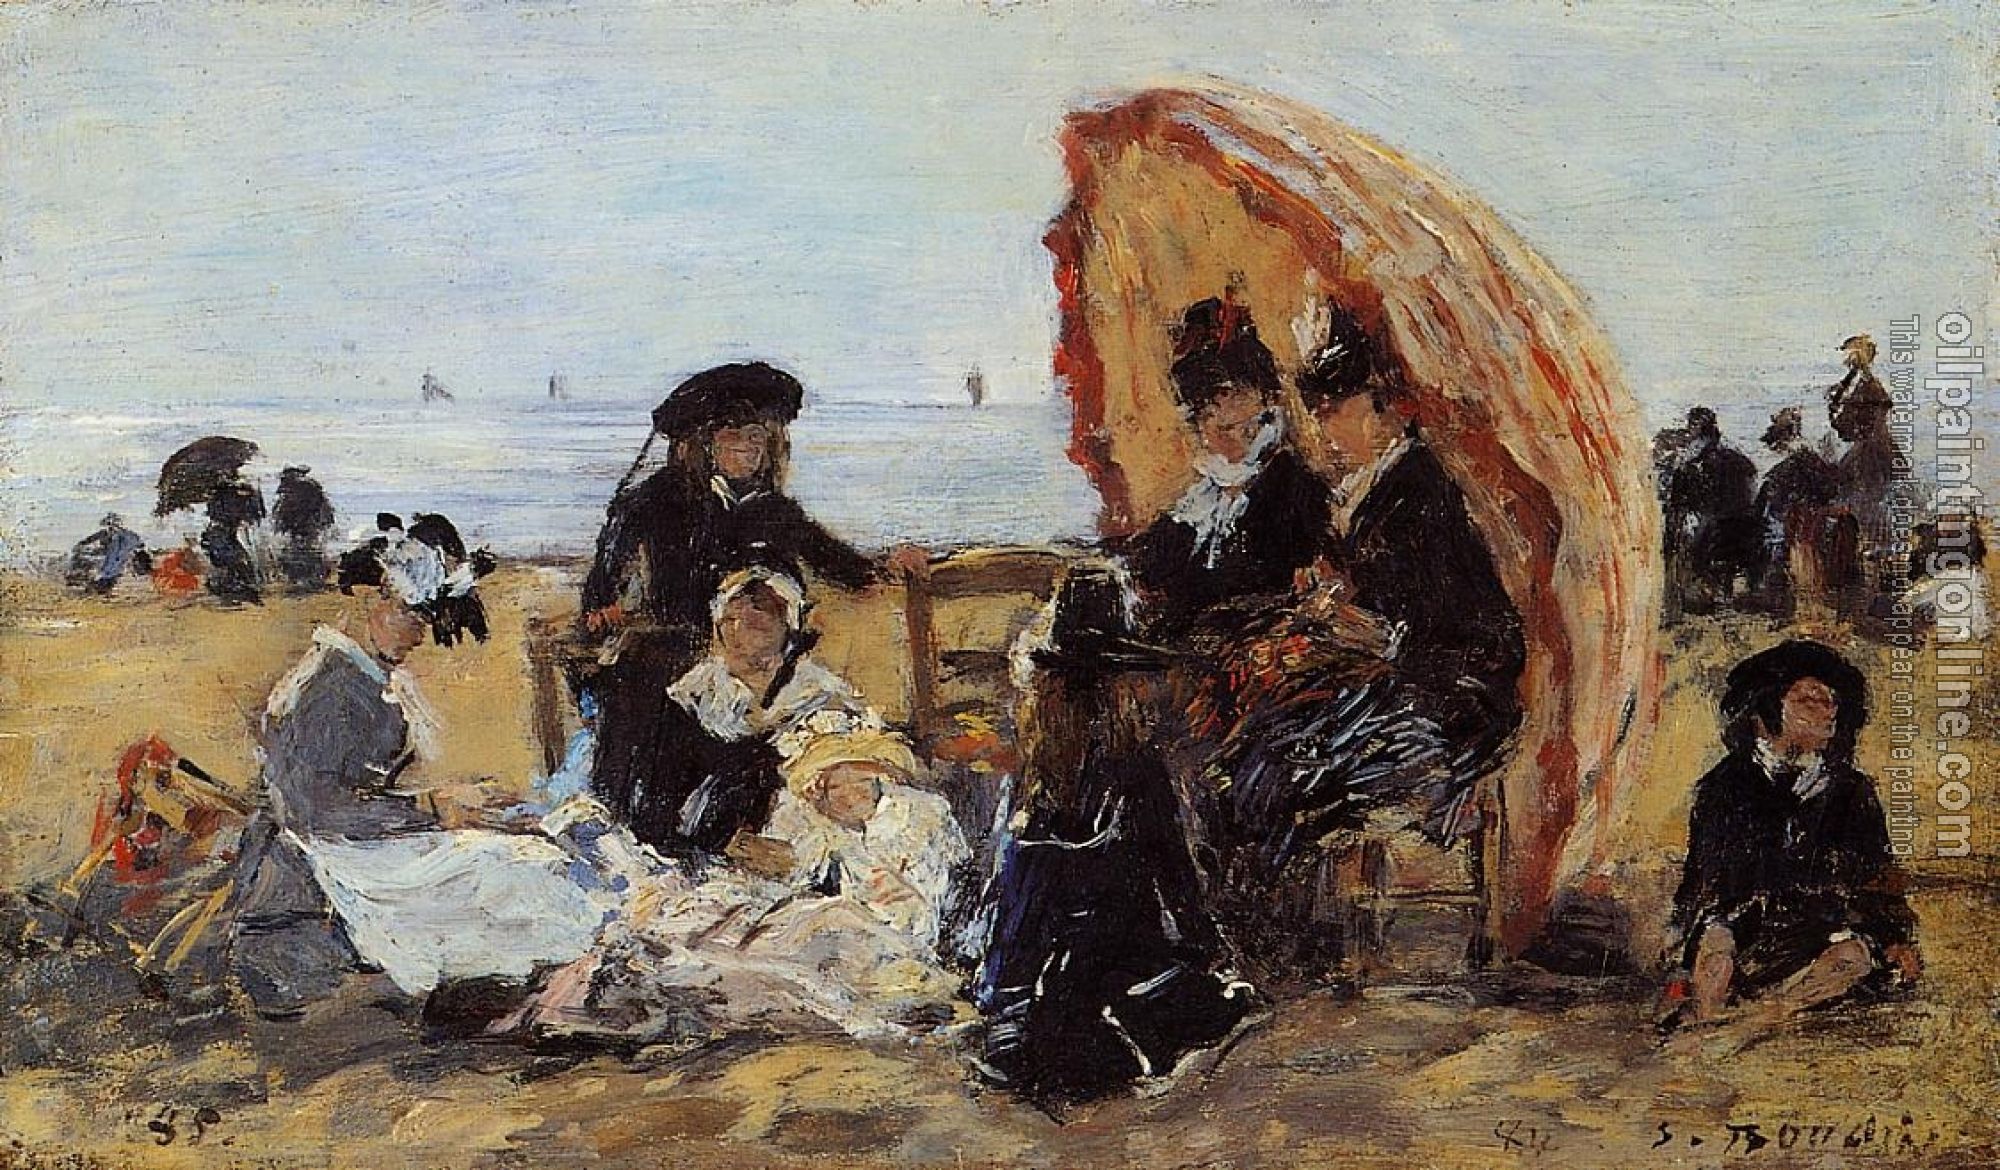 Boudin, Eugene - Trouville, on the Beach Sheltered by a Parasol